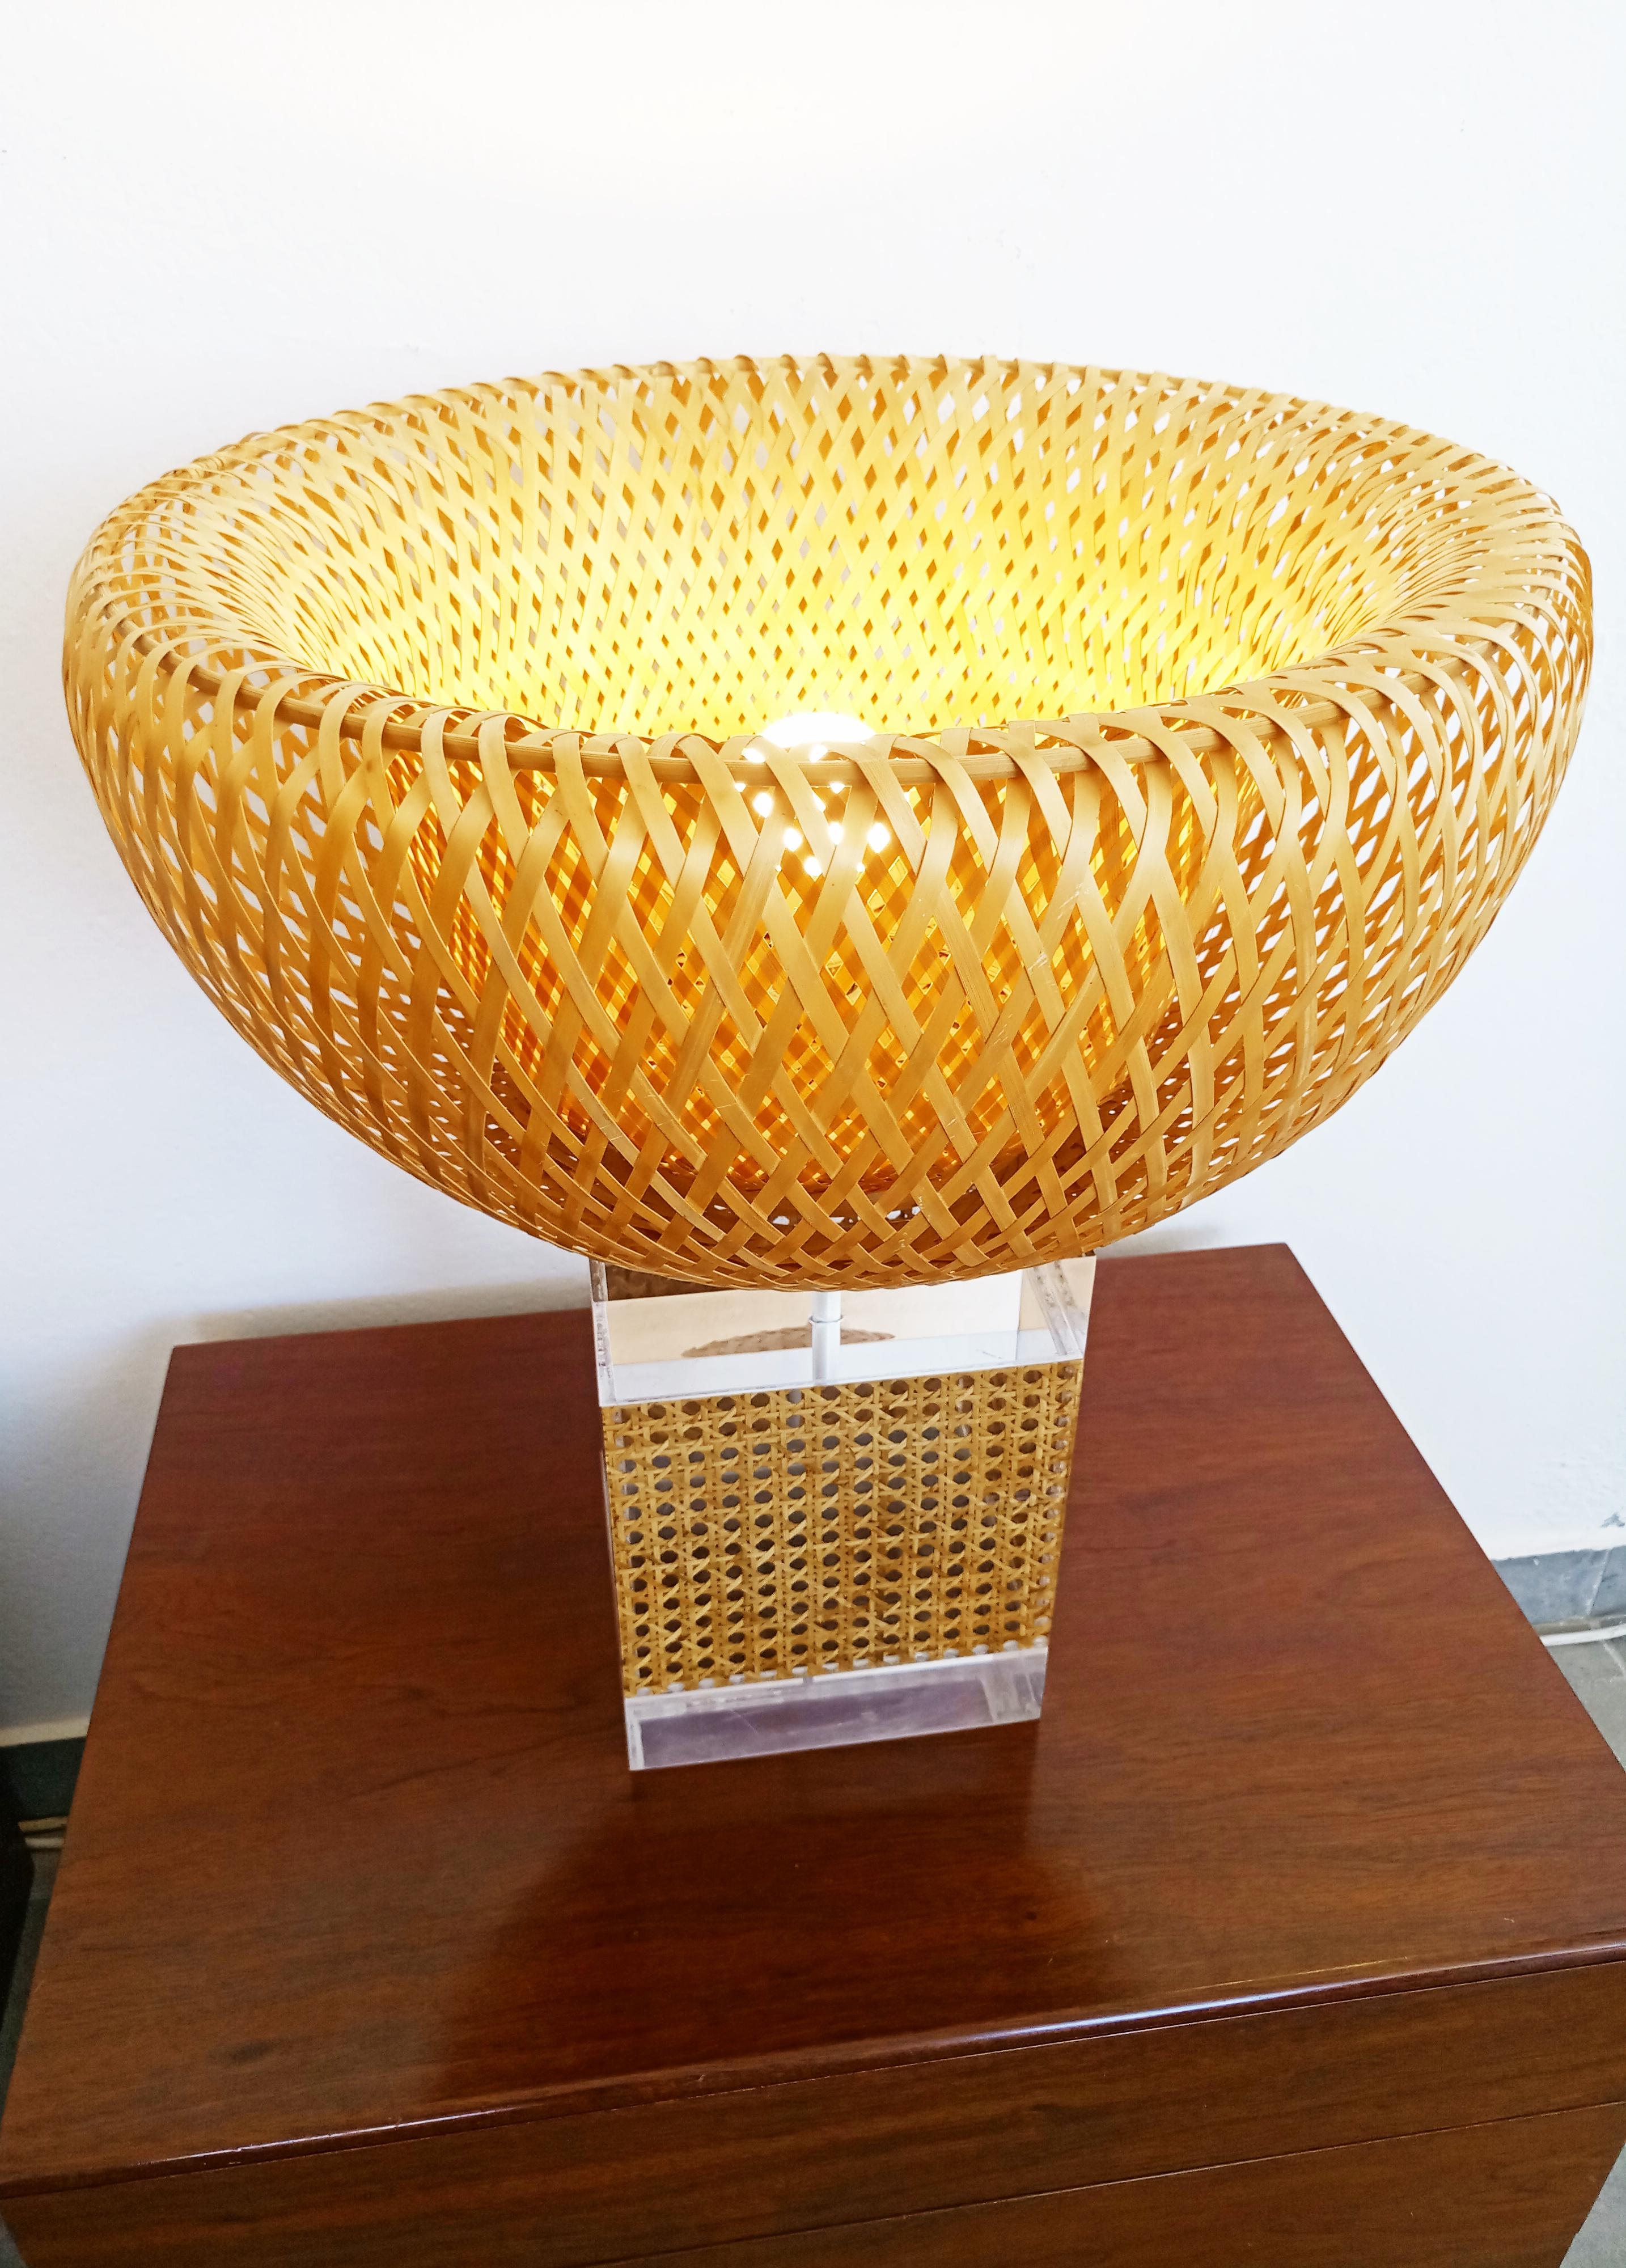 Cane Large Caning and Lucite Table Lamp, France, 1970s For Sale